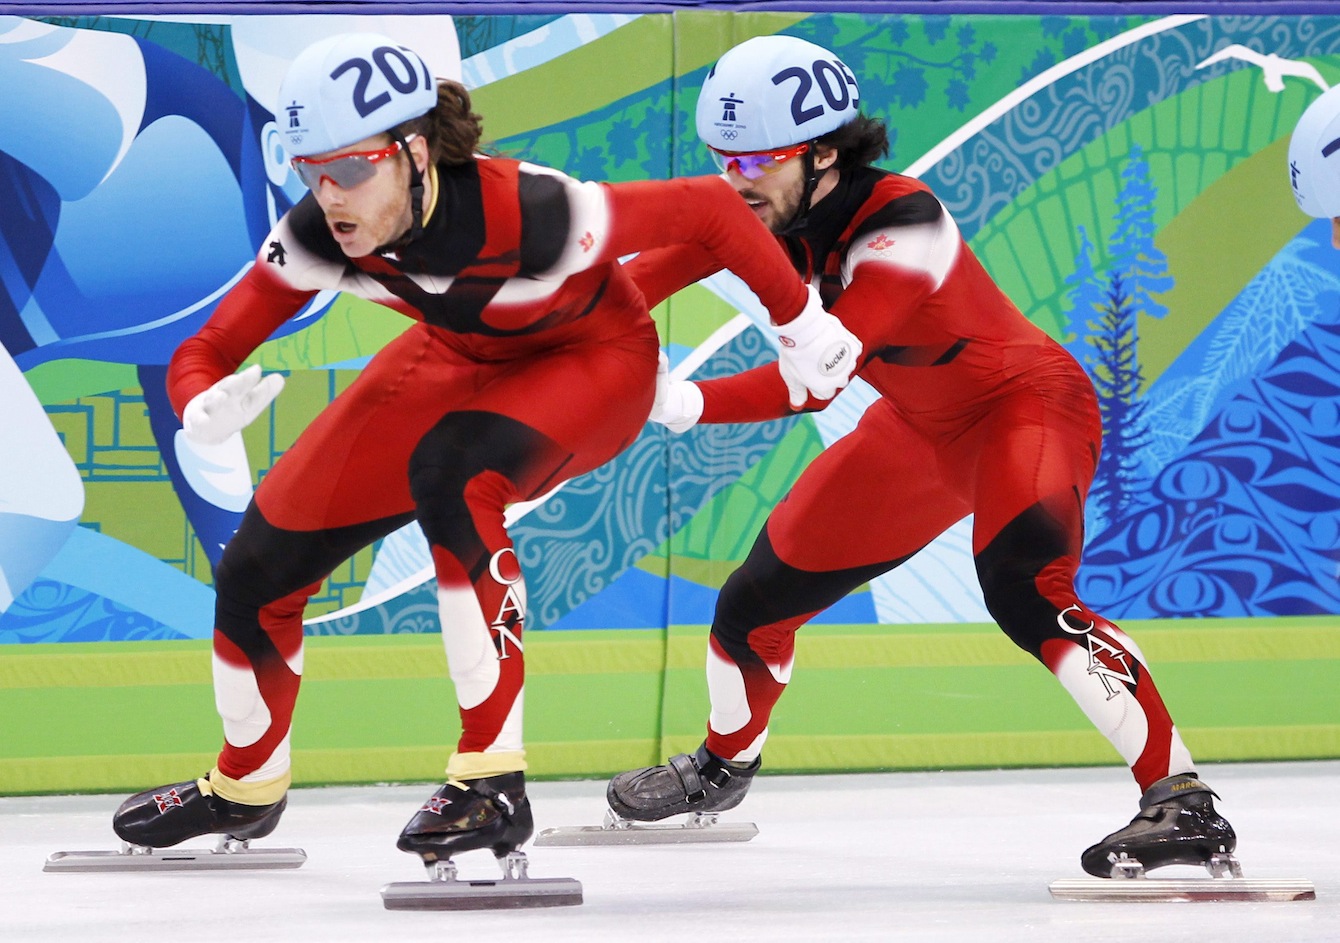 One short track speed skater pushed another in a relay